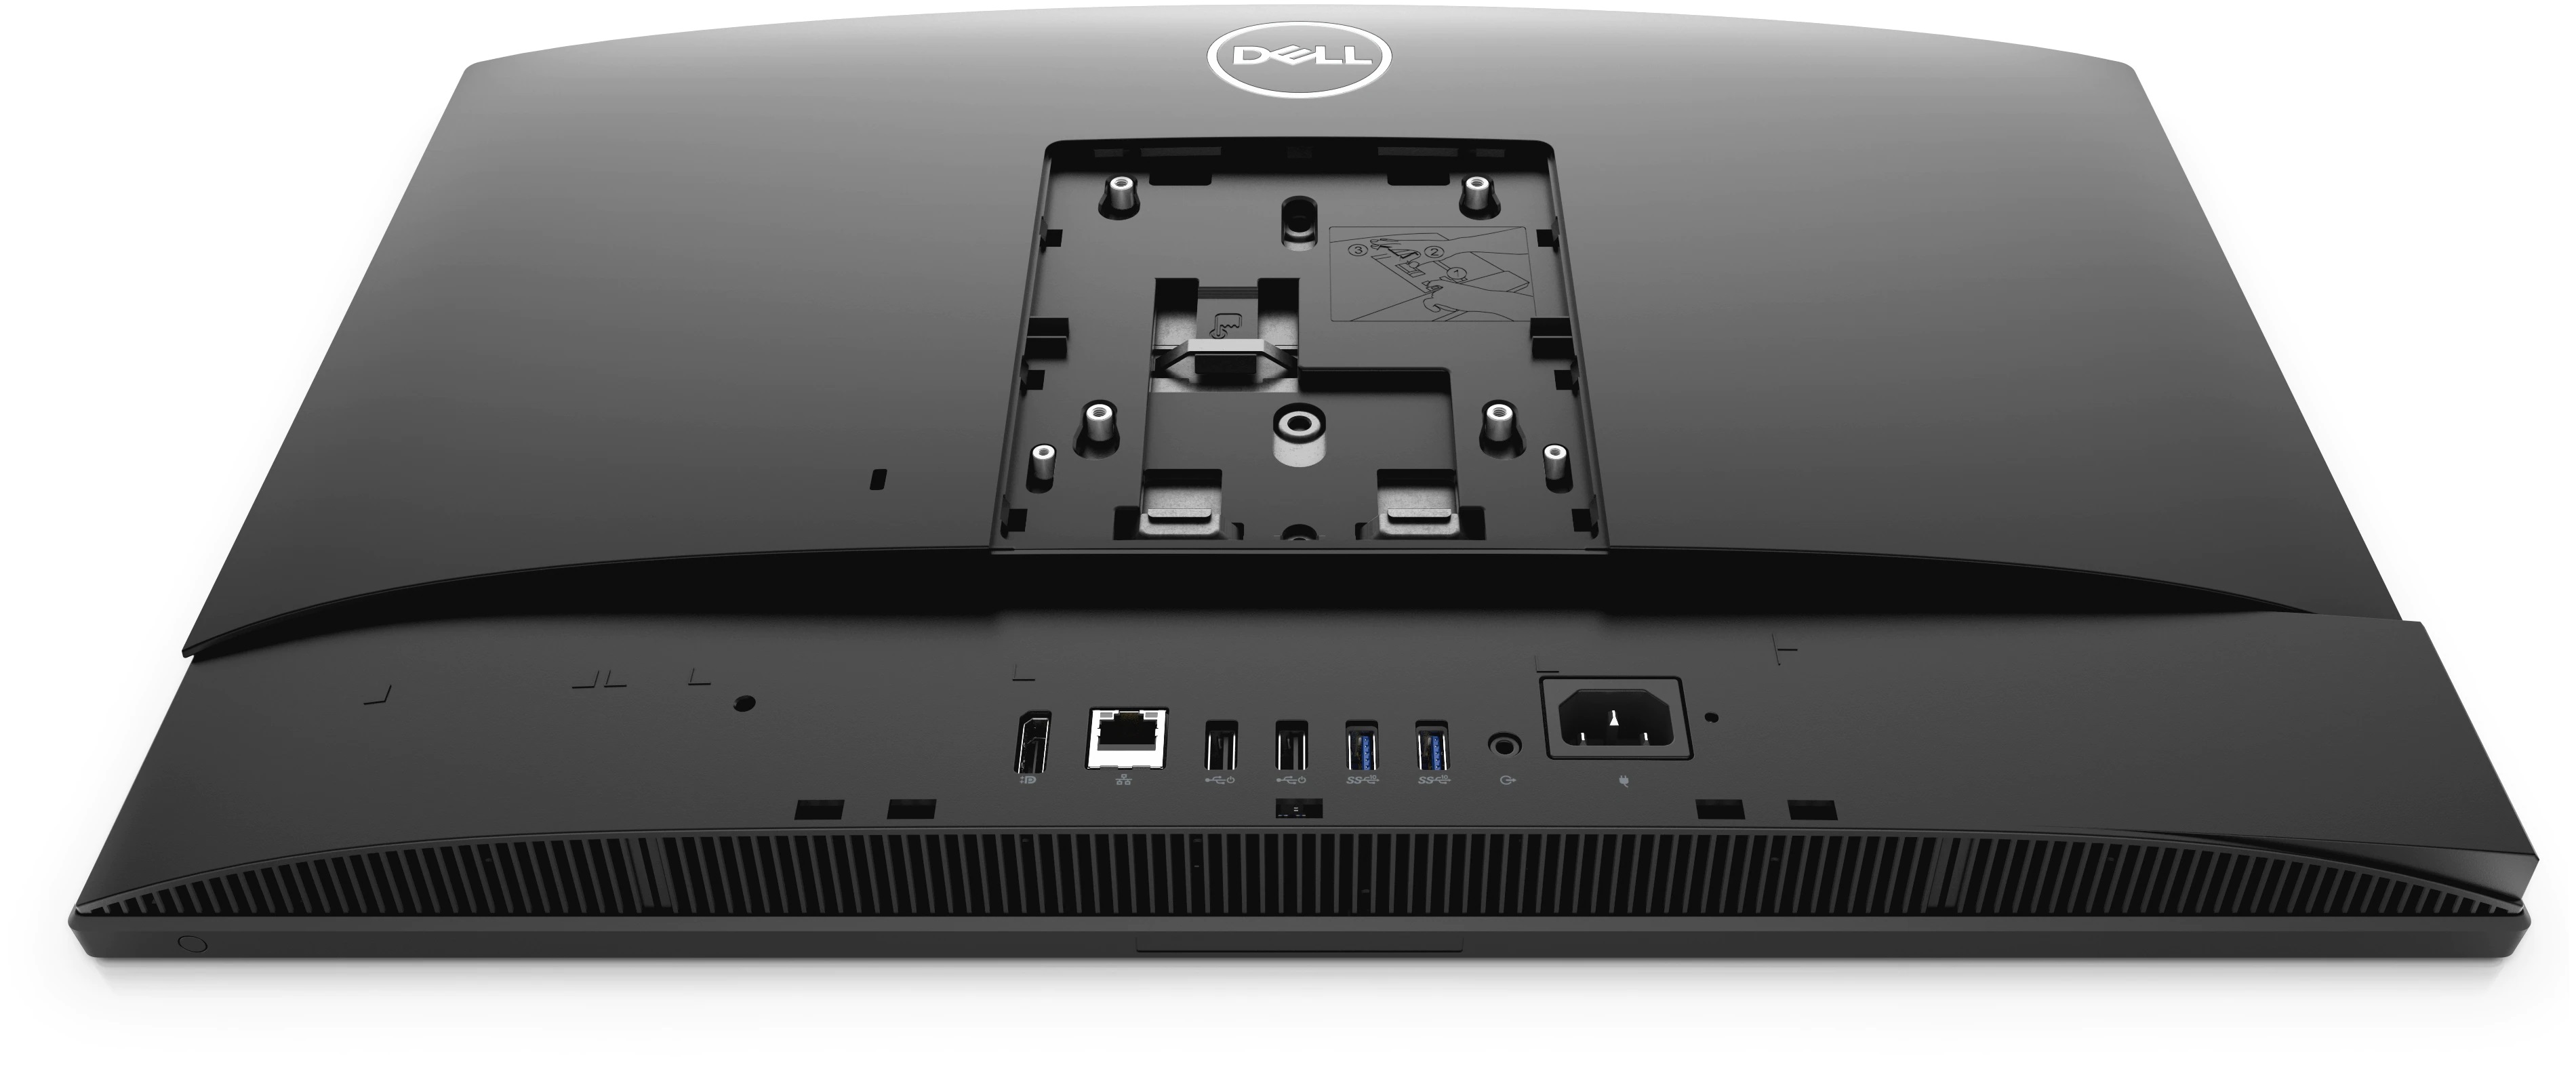 All-in-One PC - 23.8" DELL OptiPlex 5490 FHD IPS Non-Touch AG (Intel Core i7-10700T, 16GB (1X16GB) DDR4, M.2 512GB PCIe NVMe, noODD, CR, Integrated graphics, WiFi6  AX201 2x2 (Gig+)+ BT5.1, TPM, Webcam, Wireless Keyboard and Mouse - KM5221W, Height  Adjustable Stand, Win10Pro, Black)